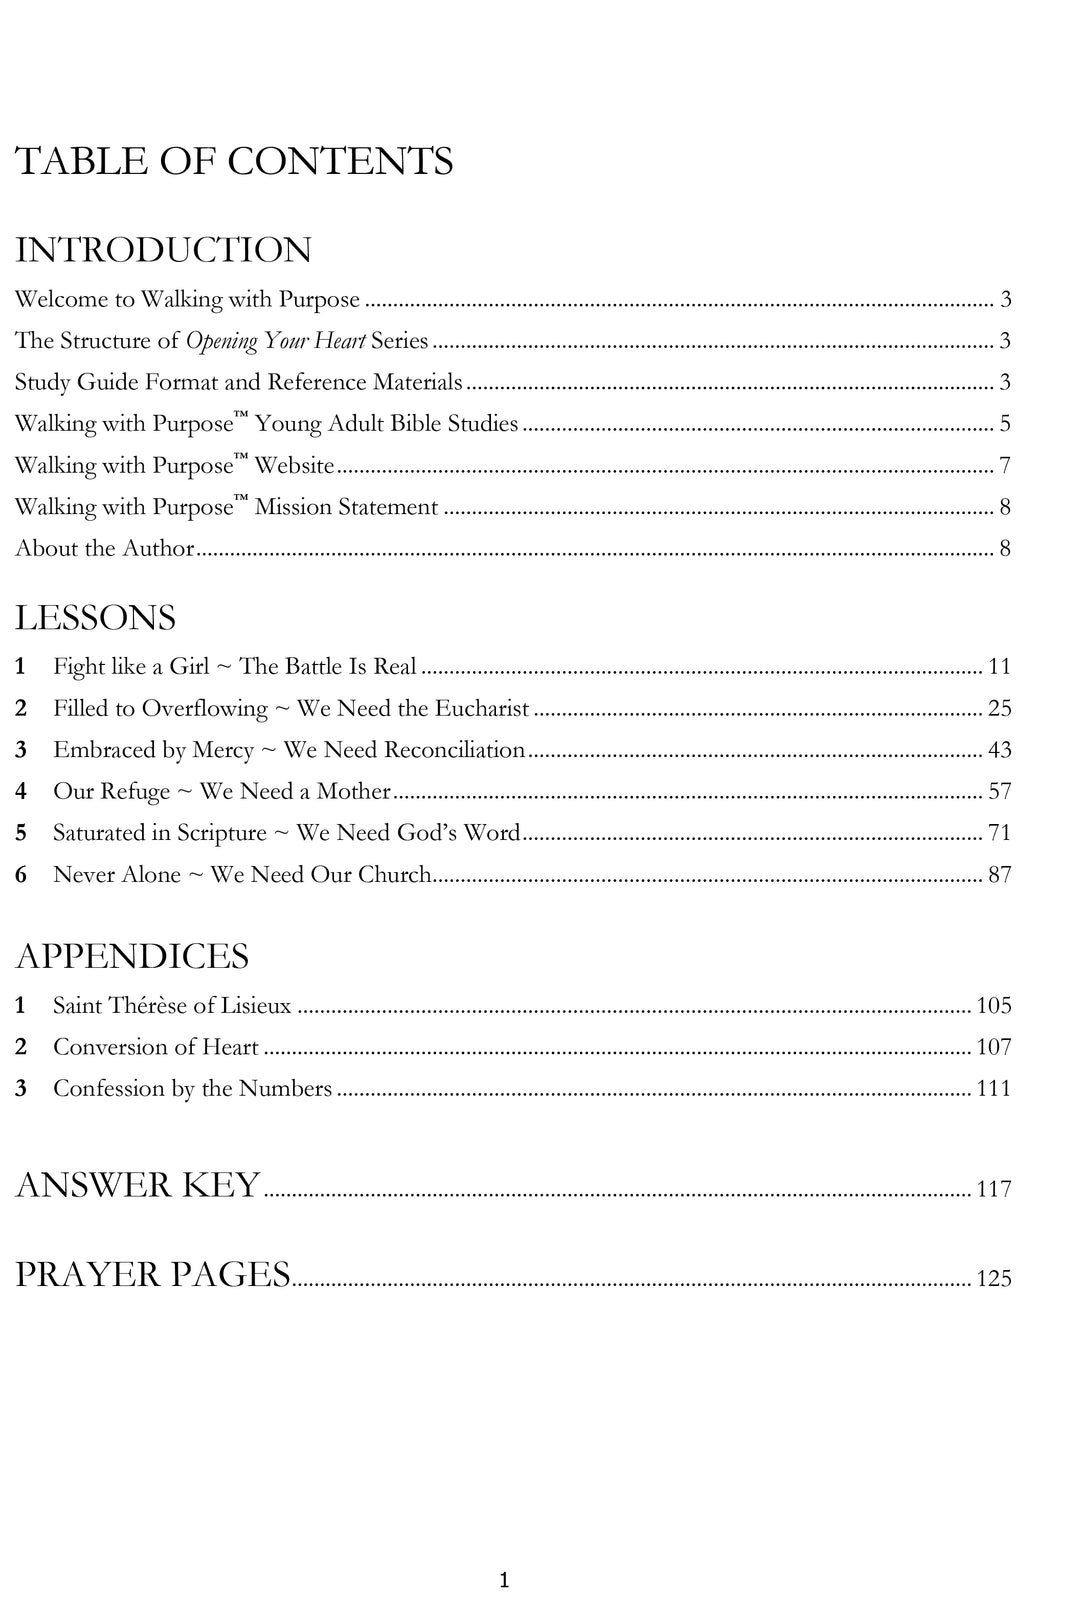 Unshaken - Opening Your Heart Young Adult Series - Part II table of contents